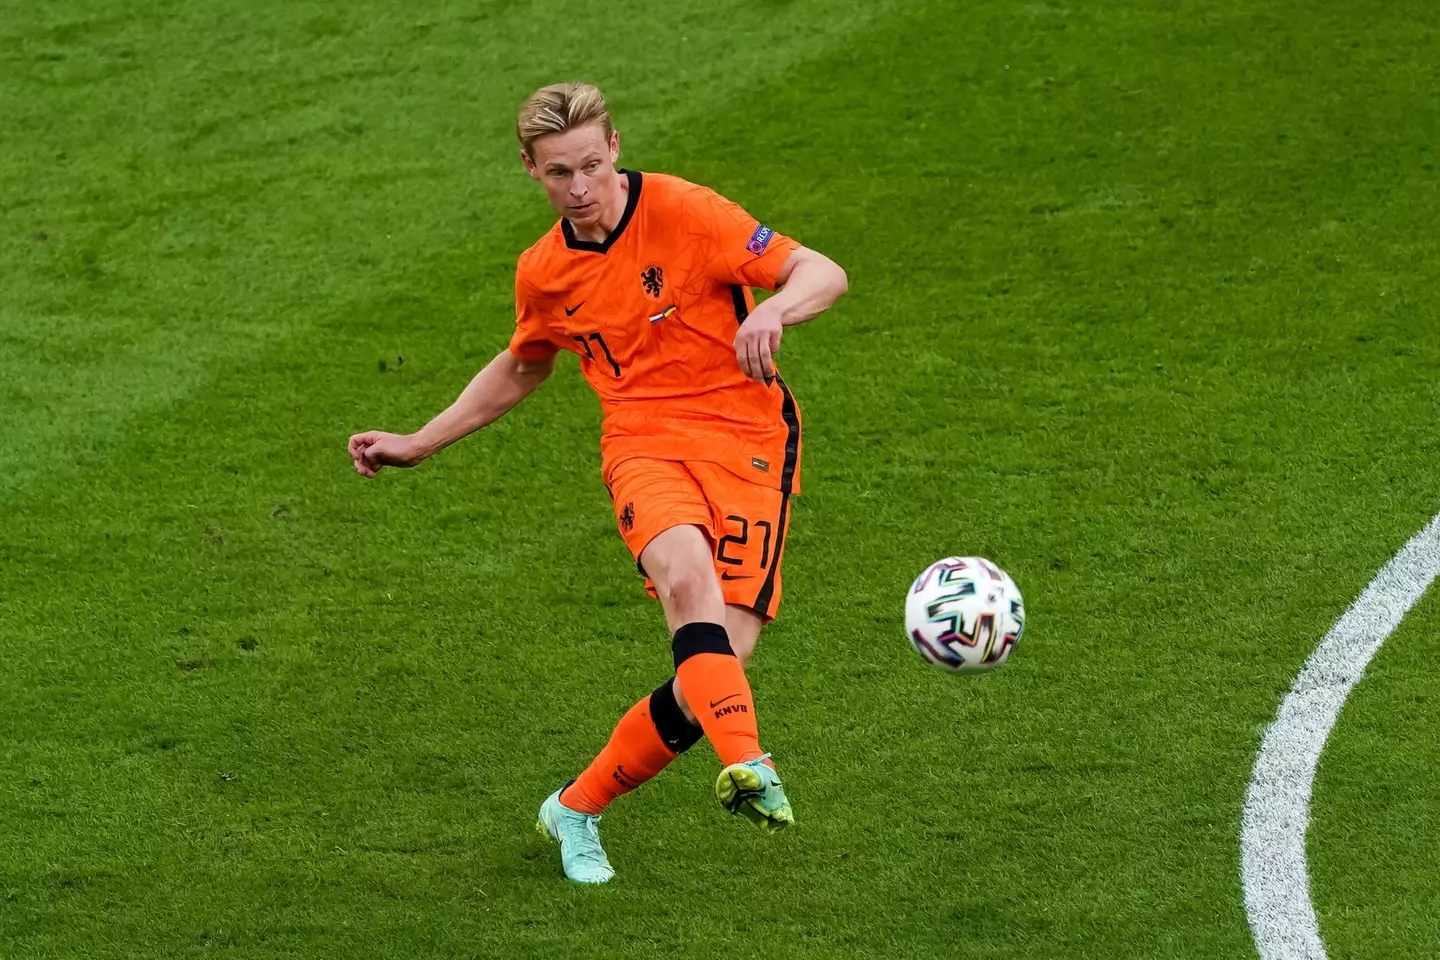 Frenkie de Jong's future hangs in the balance as Barcelona and Manchester United stand firm. (Alamy)